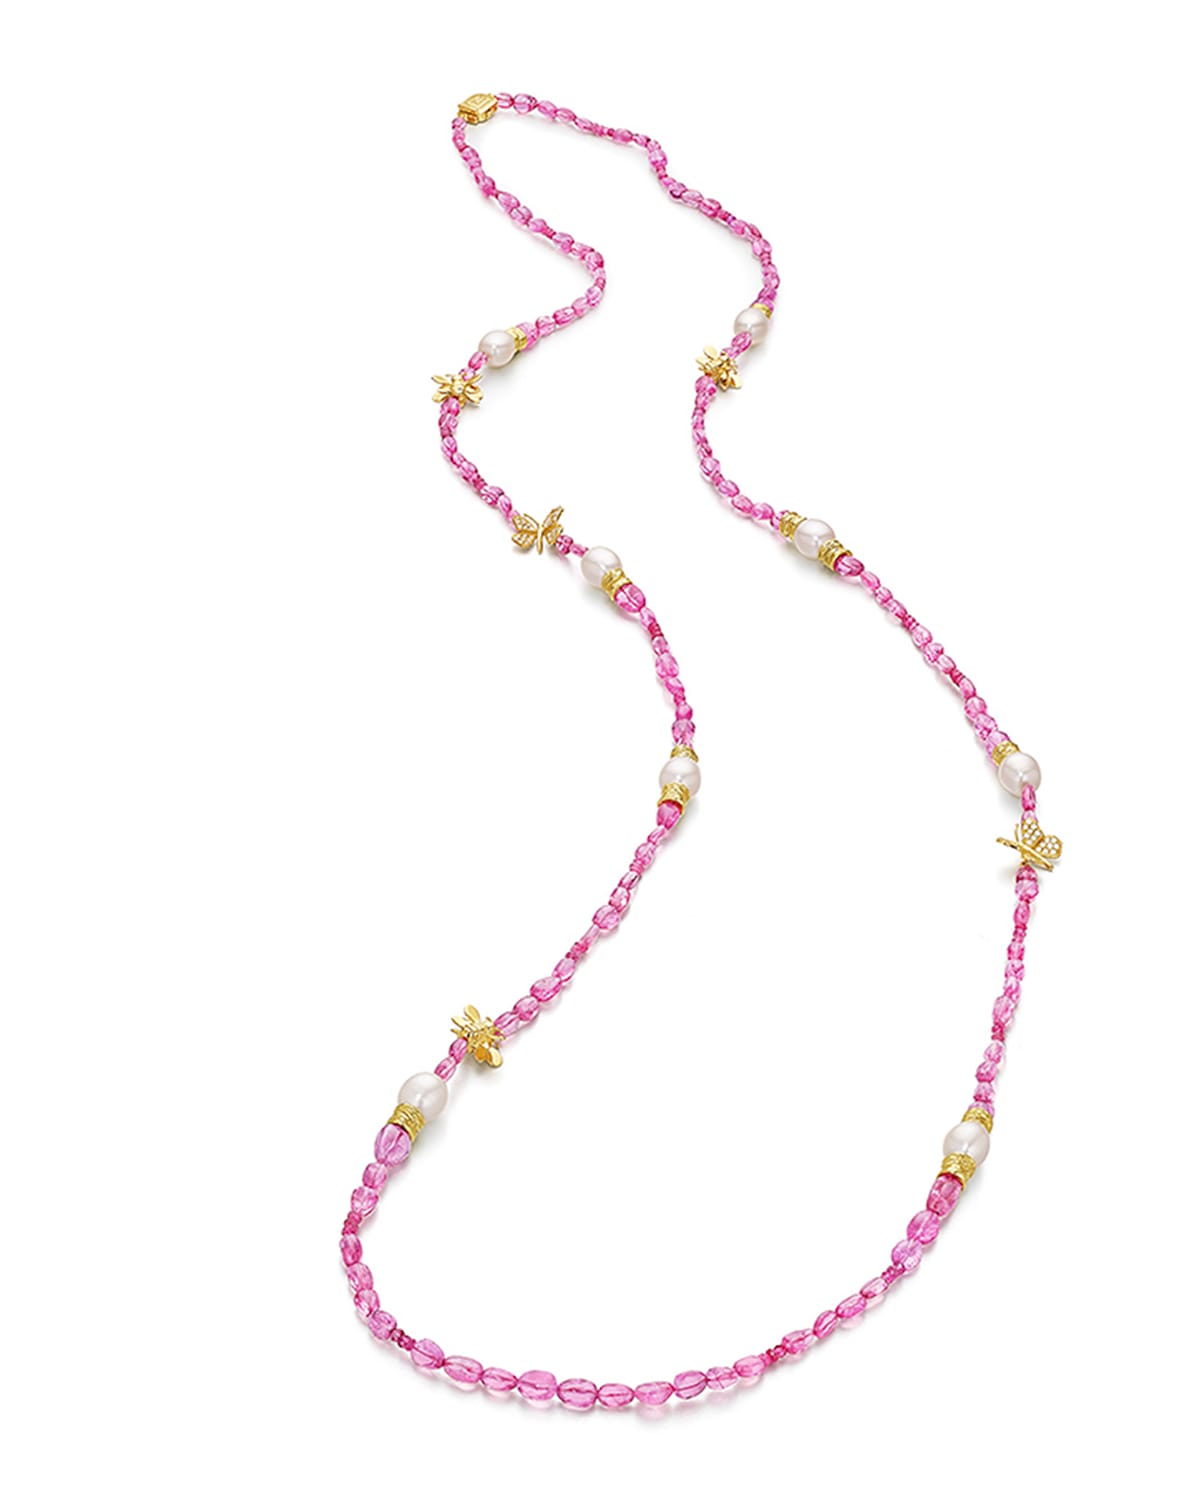 Wonderland Pink Spinel, Pearl and Diamond Necklace